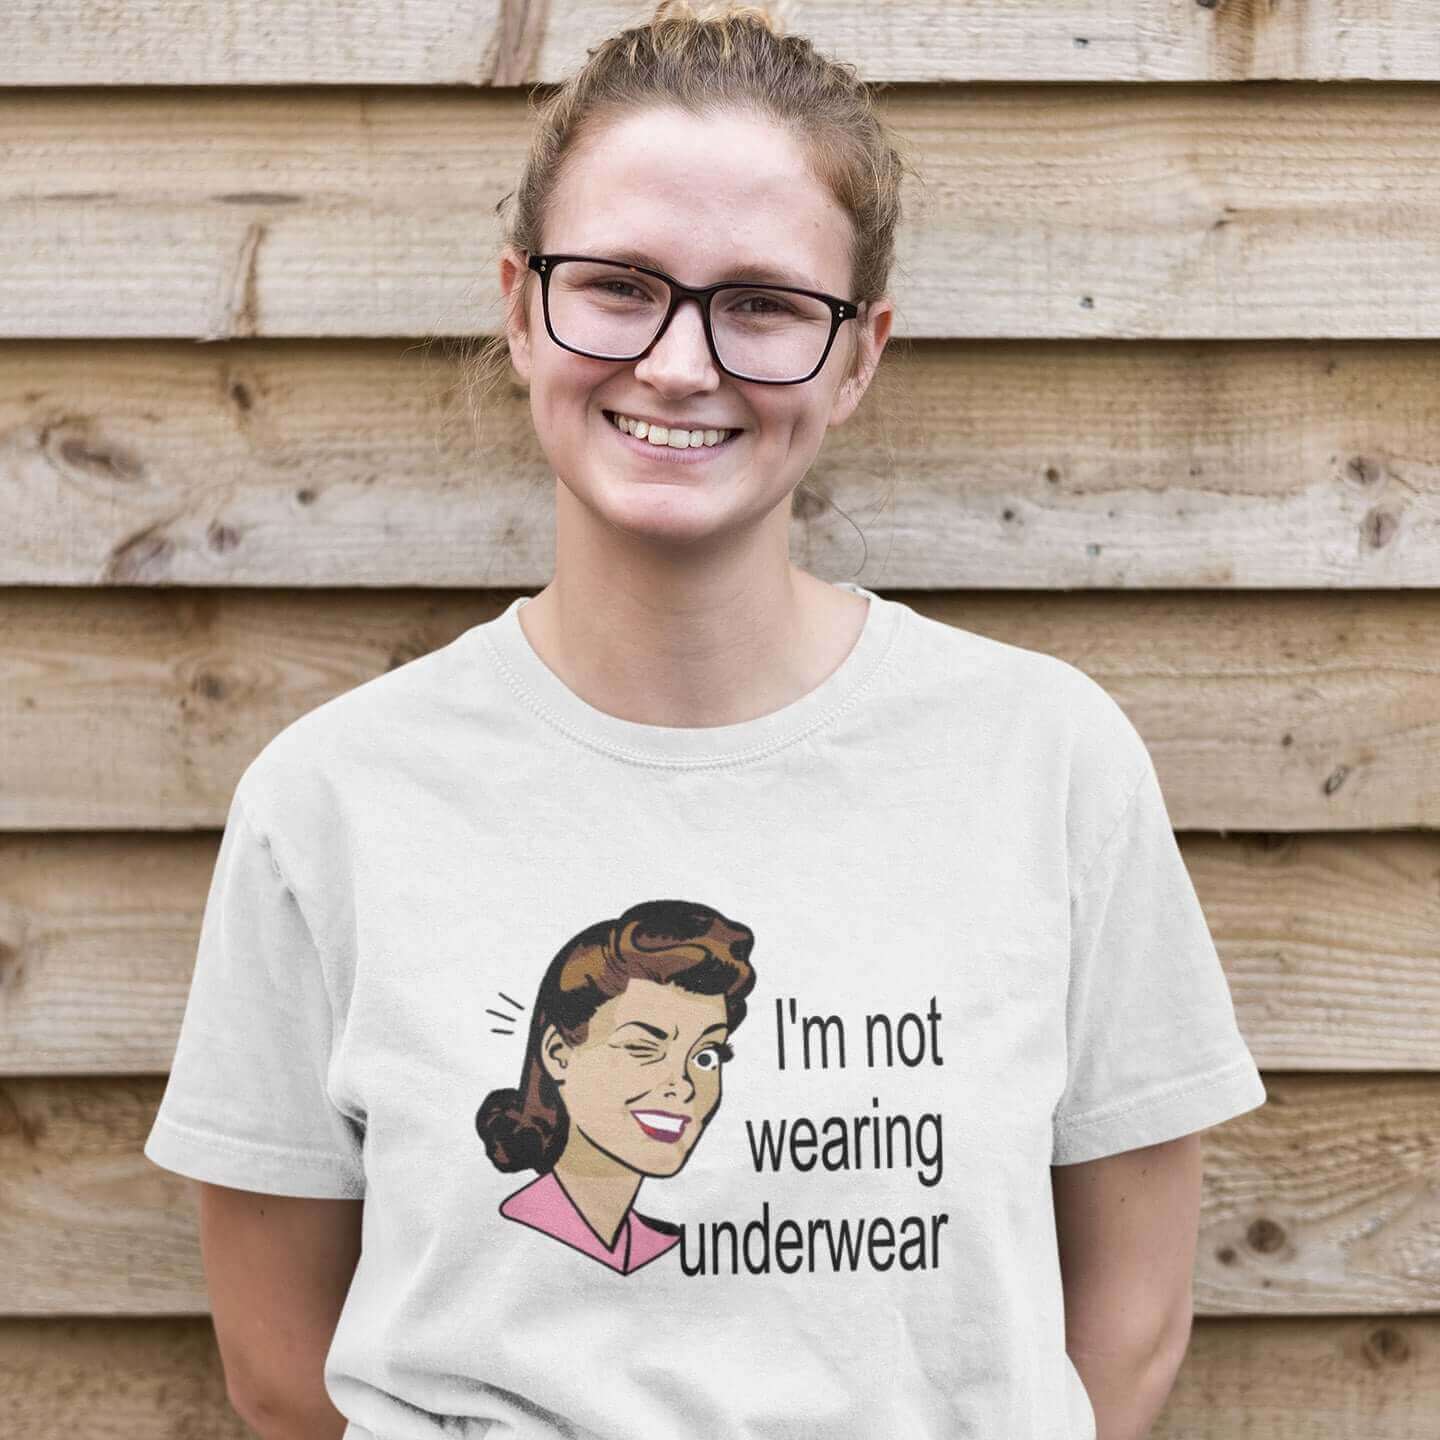 Woman wearing a white t-shirt with an image of a retro woman and the phrase I'm not wearing any underwear printed on the front.